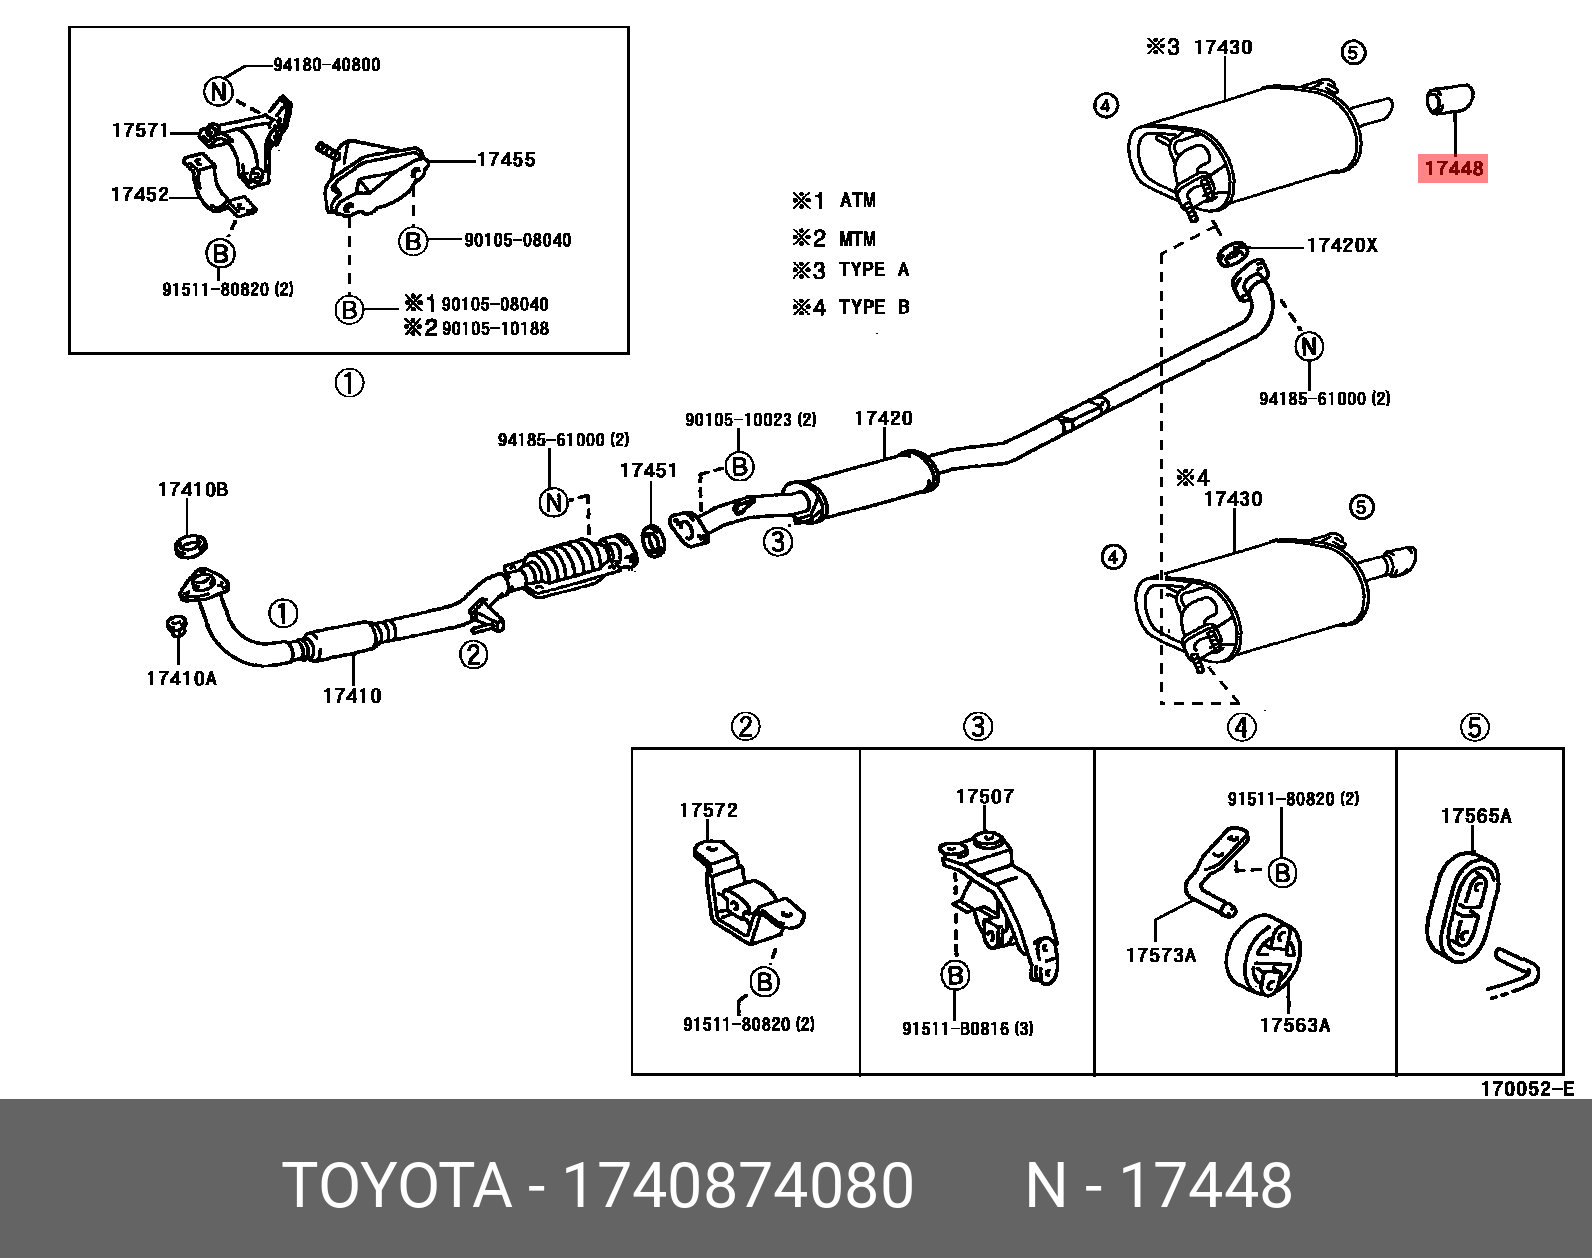 CAMRY 200109 - 200601, BAFFLE, TAIL PIPE